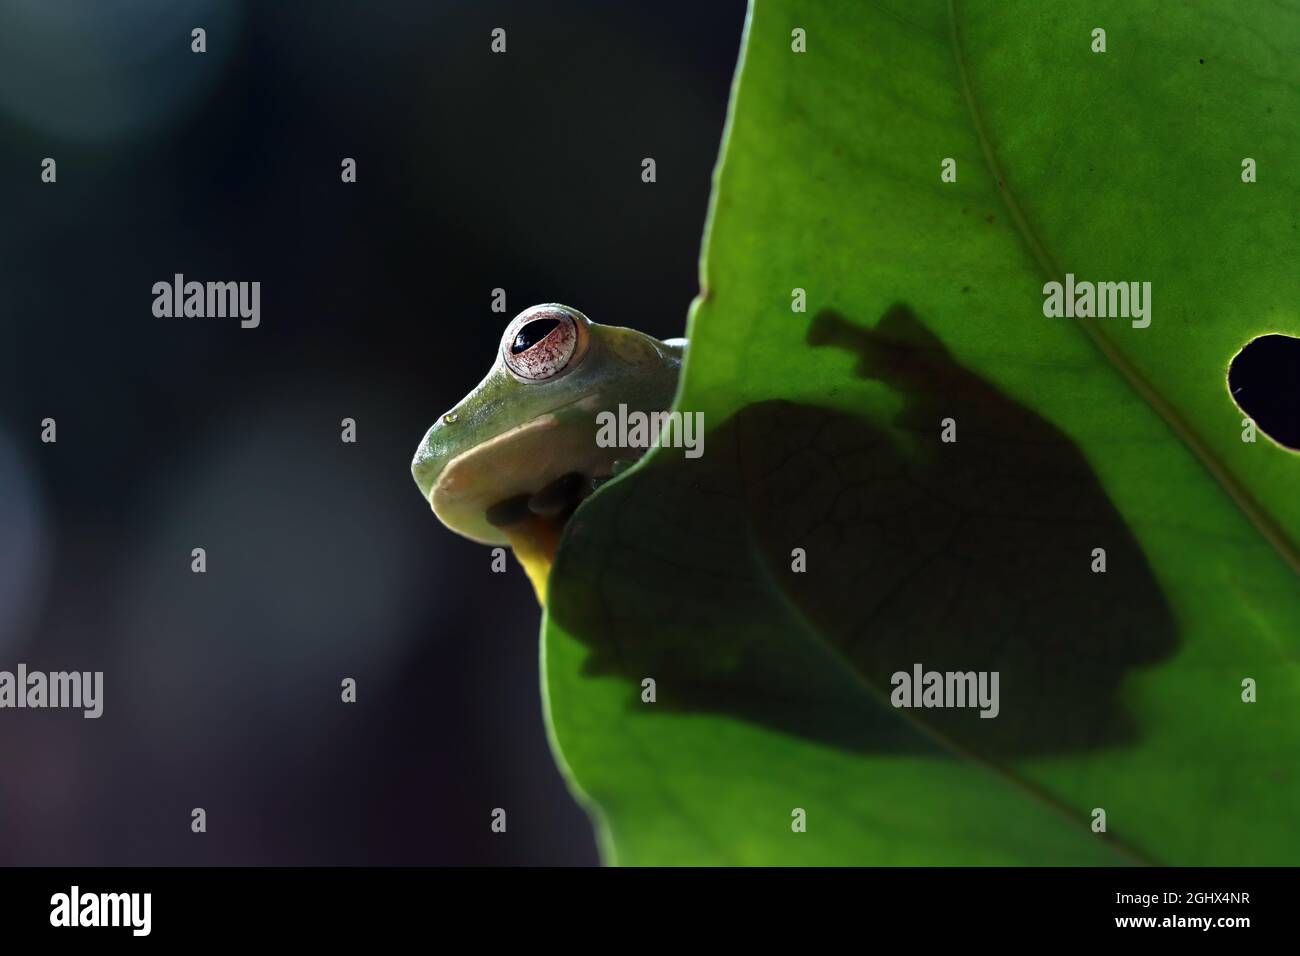 Low angle view of a Malayan tree frog on a leaf, Indonesia Stock Photo